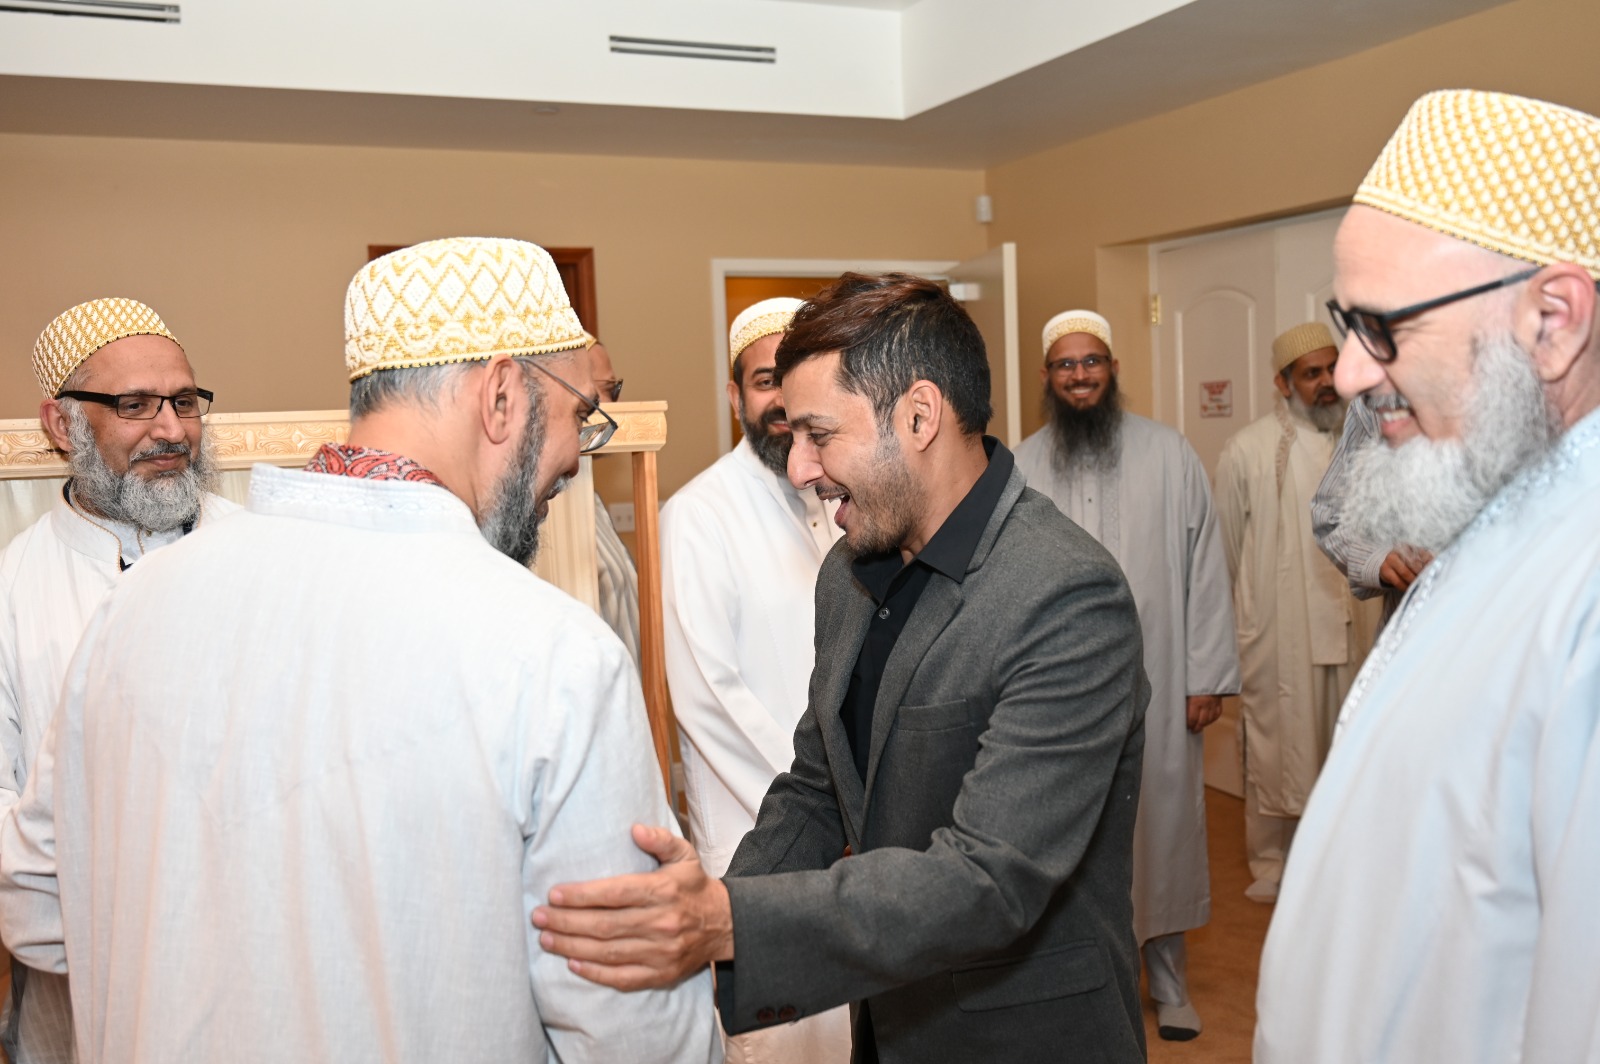 UN Champion of the Earth, Afroz Shah, meets the Dawoodi Bohra community of LA to discuss efforts to remove plastic waste from local waterways and coastlines.